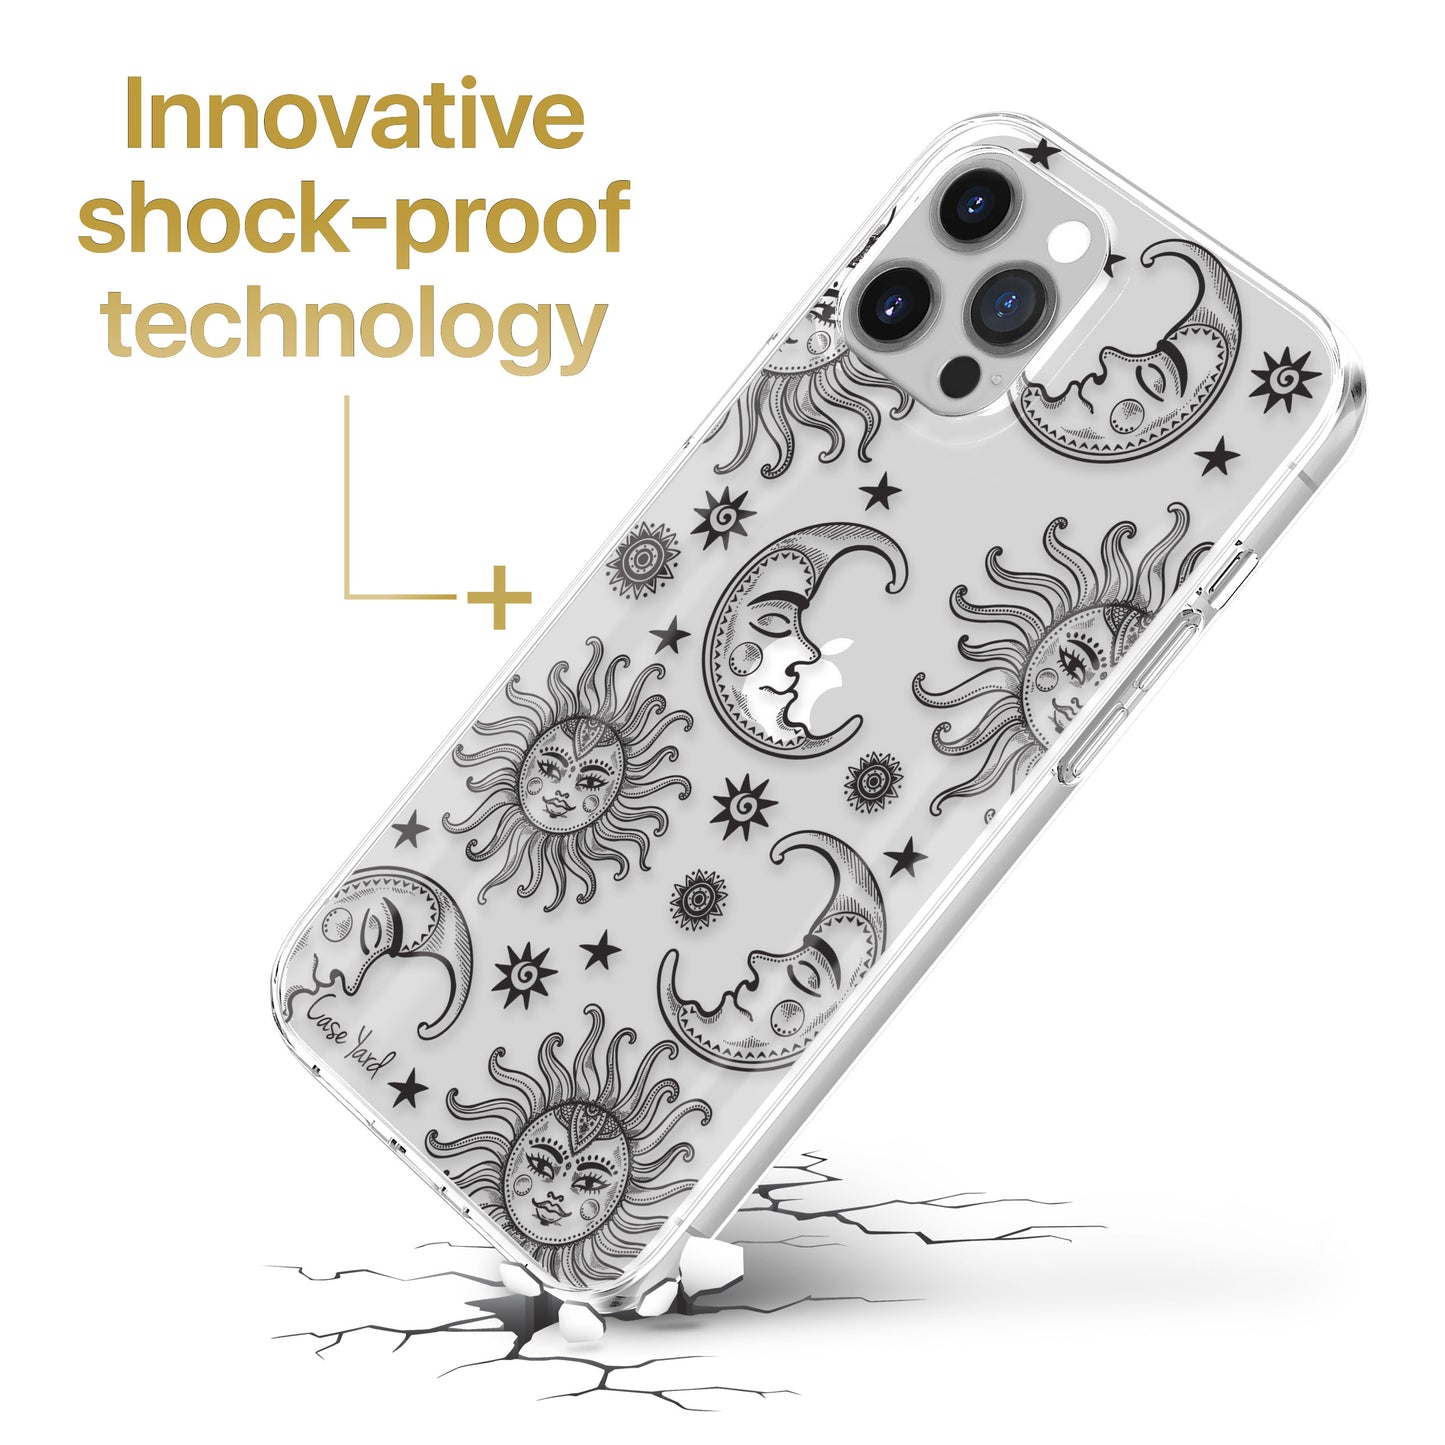 TPU Clear case with (Moon and Stars) Design for iPhone & Samsung Phones